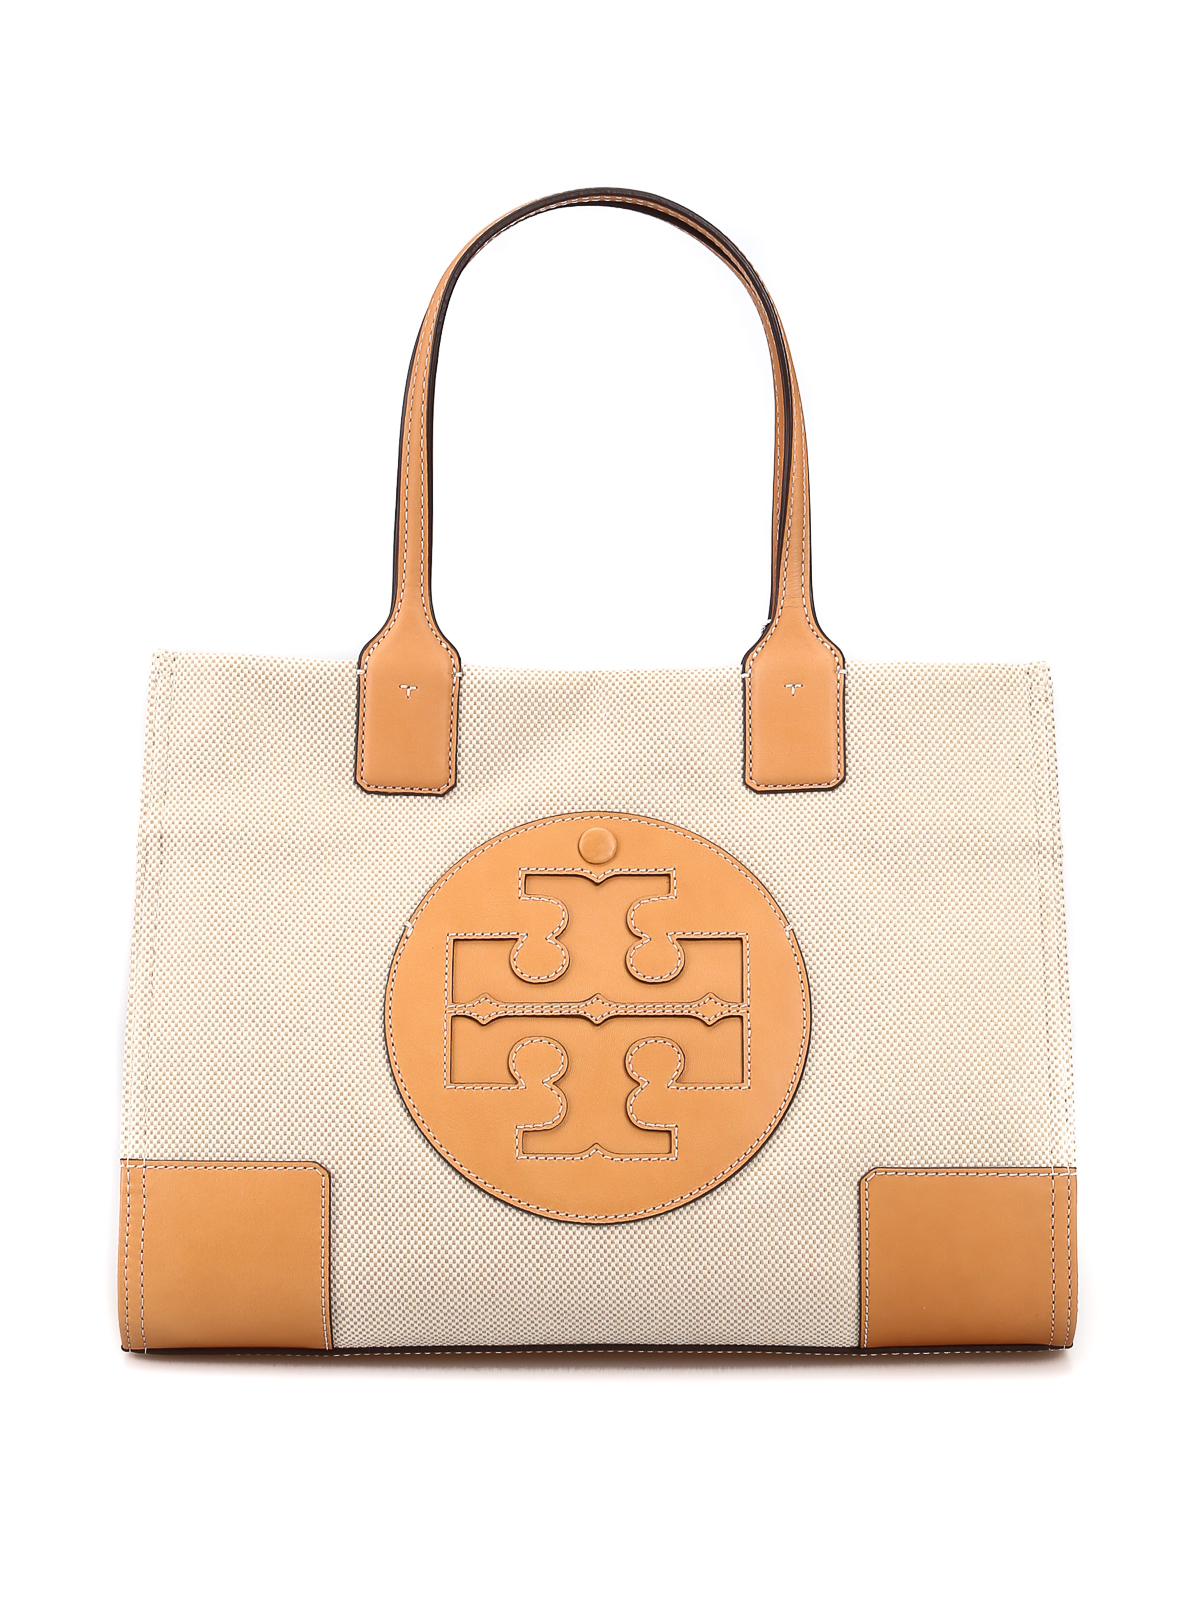 Tory Burch Women's Small Perry Tote Bag - Natural - Totes